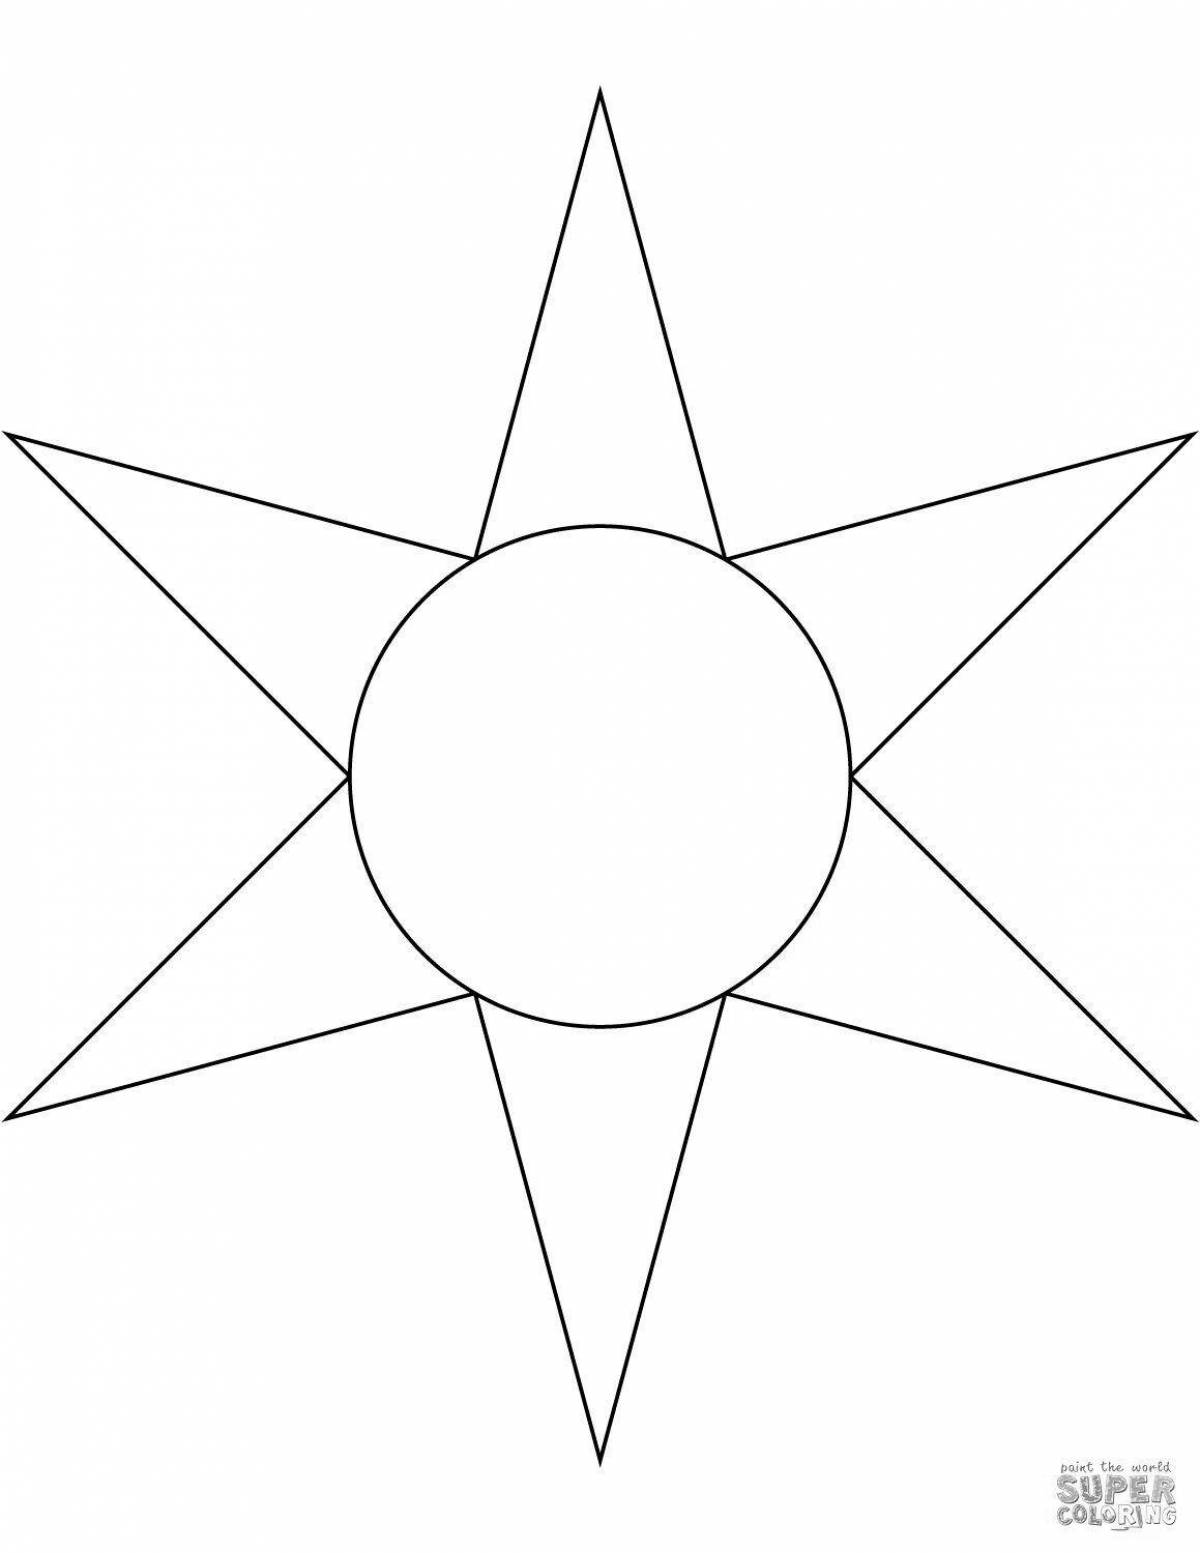 Adorable six pointed star coloring page